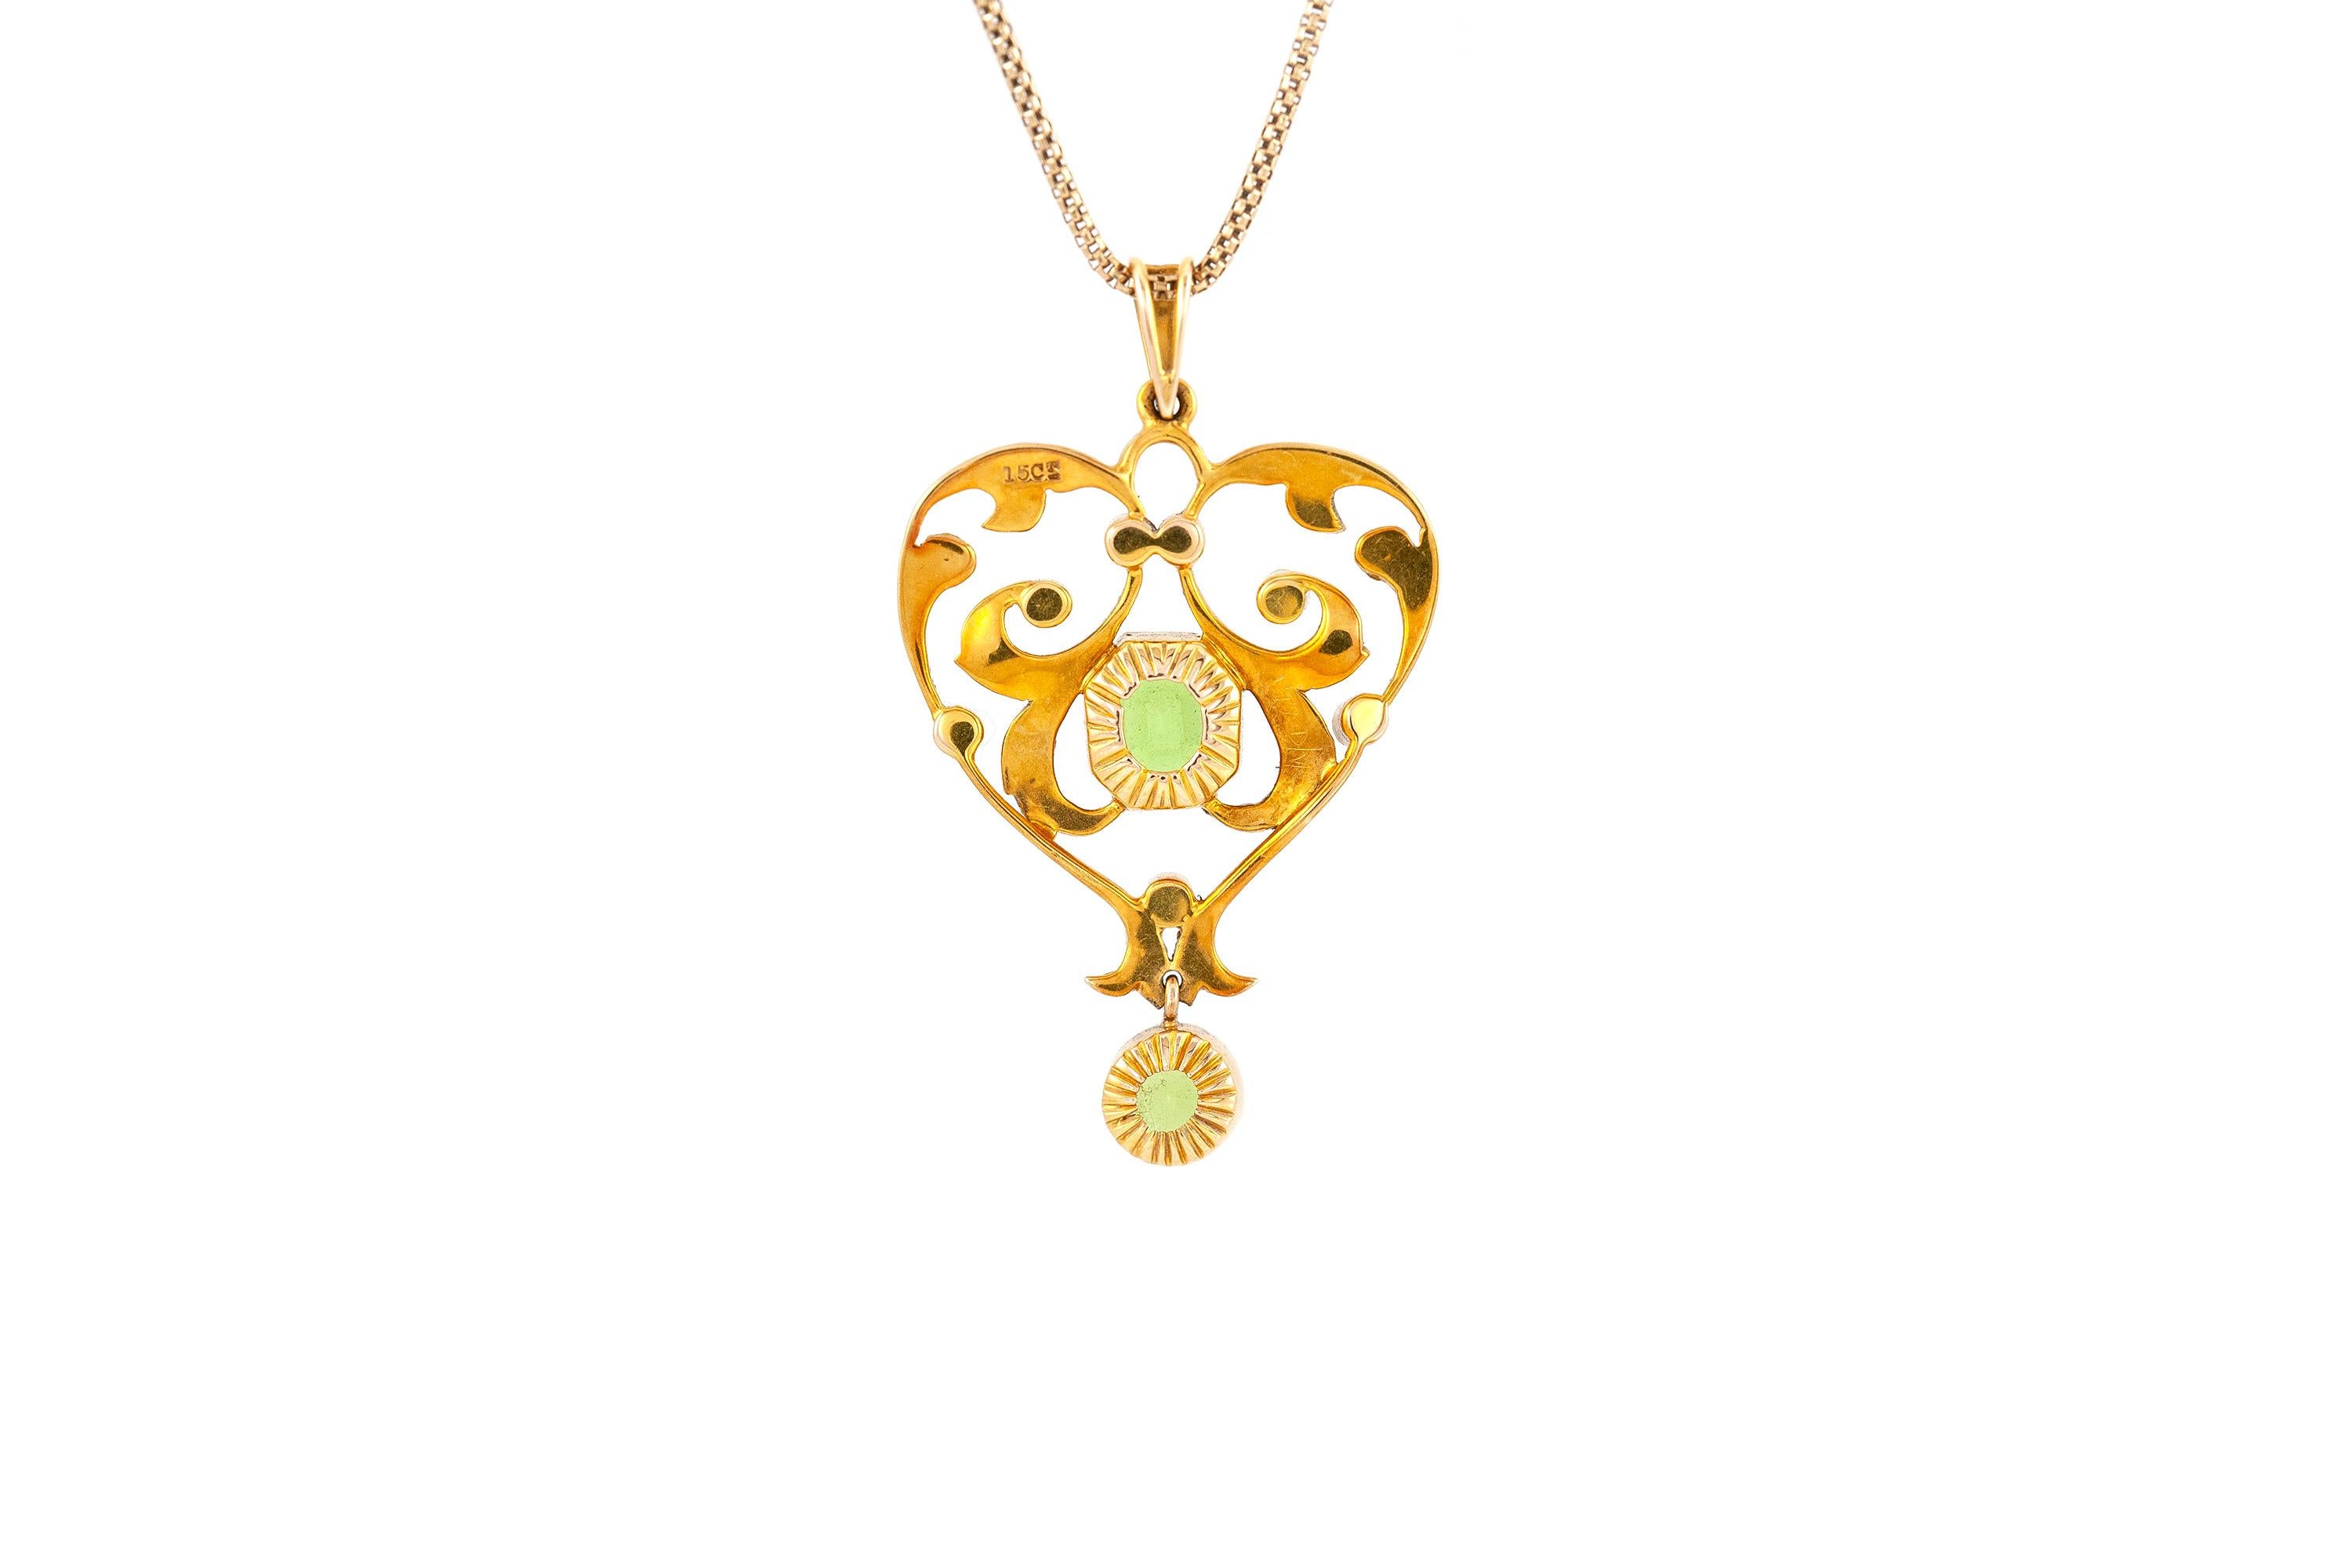 The necklace is finely crafted in 14k and 15 yellow gold with pearls and tourmalines. Circa 1920.